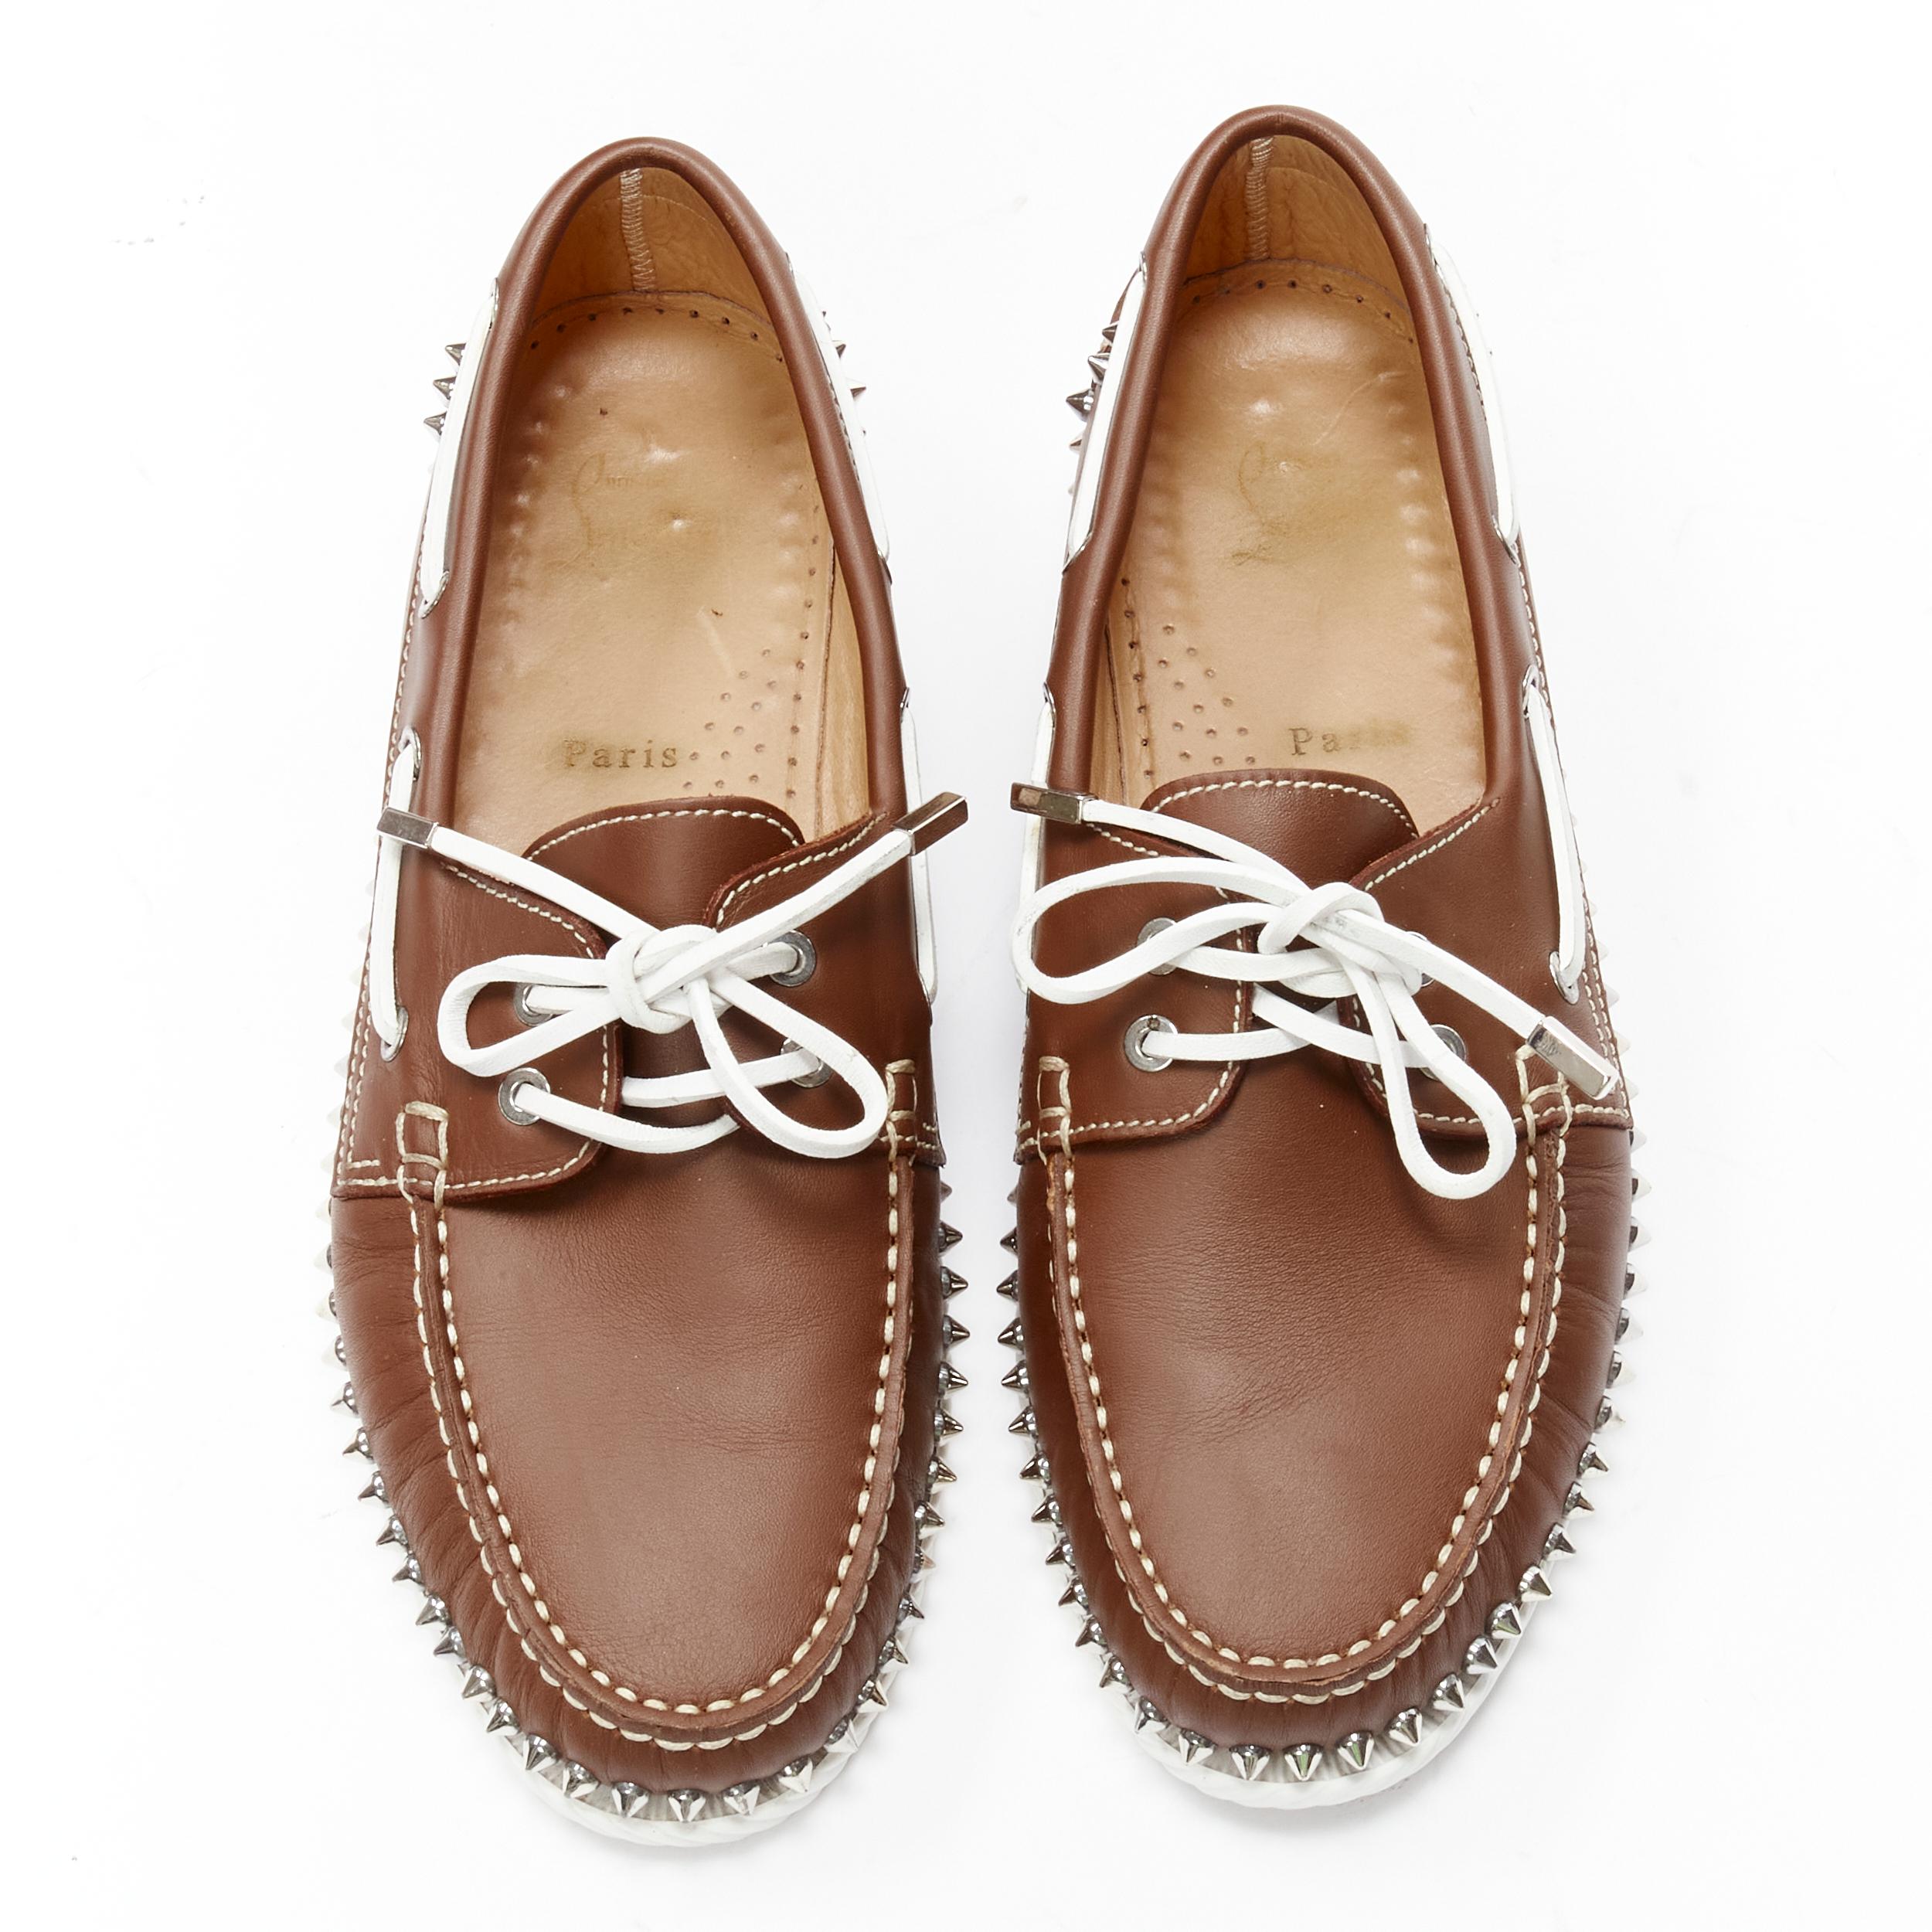 Brown CHRISTIAN LOUBOUTIN Steckel brown leather spike lace boat shoe loafer EU43.5